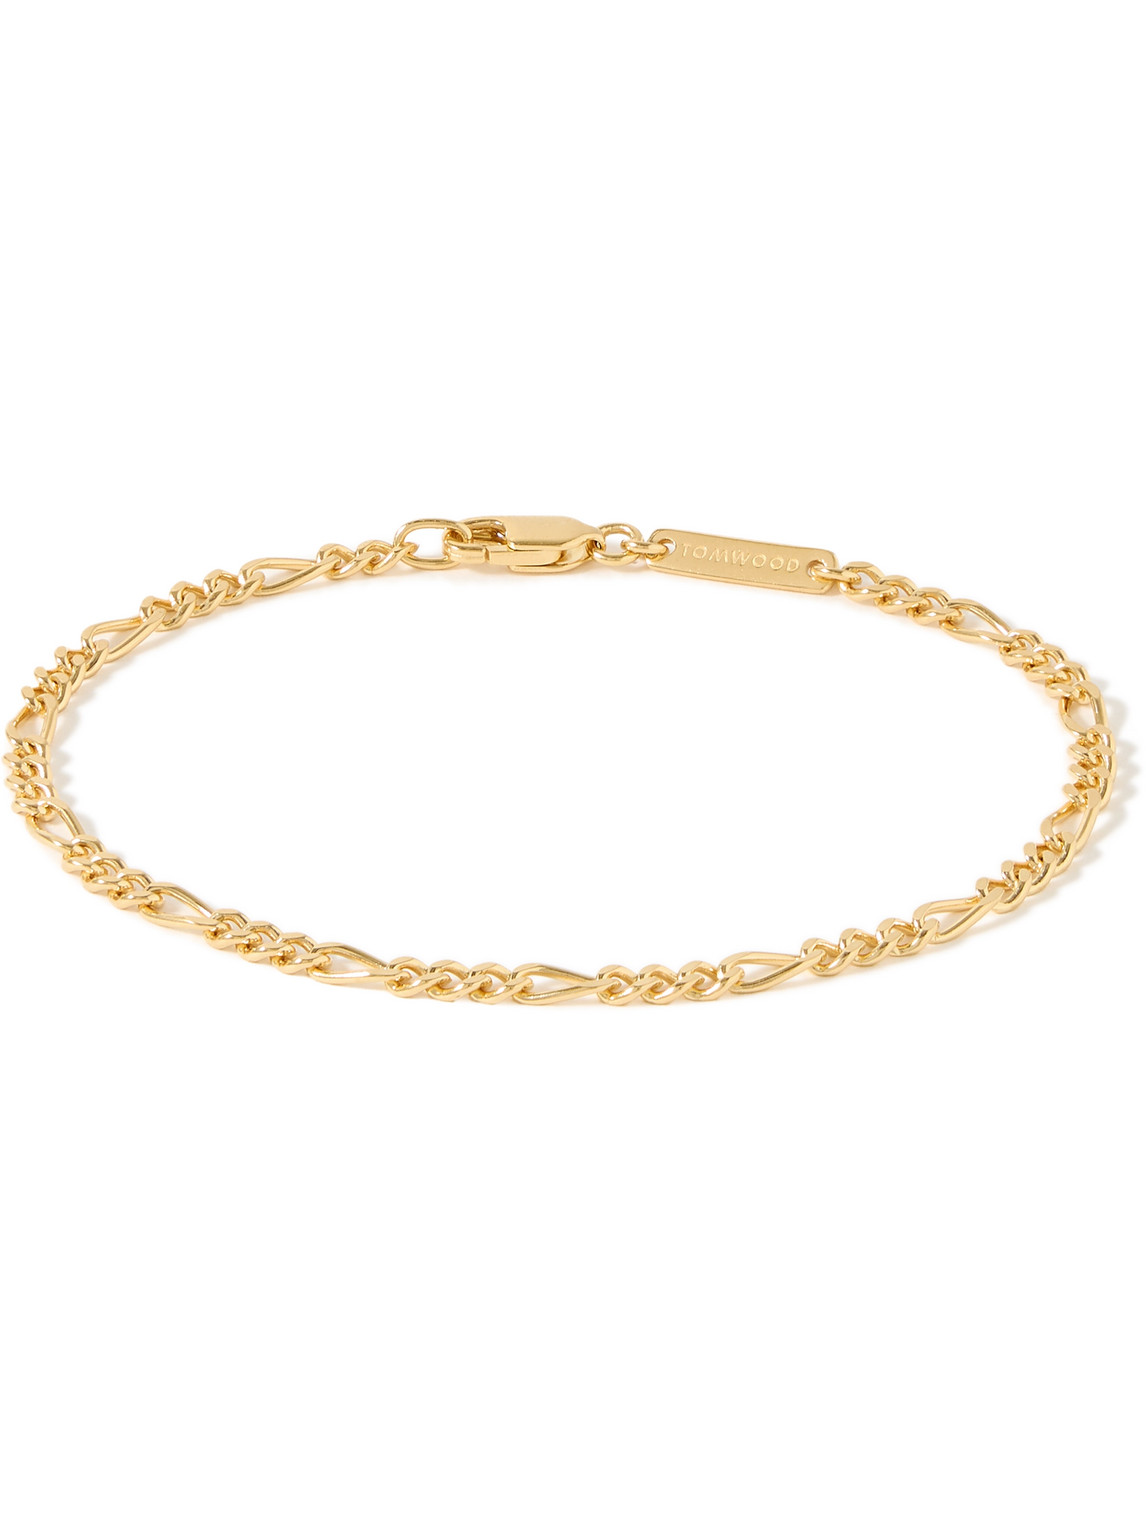 Bo Slim Recycled Gold-Plated Chain Bracelet